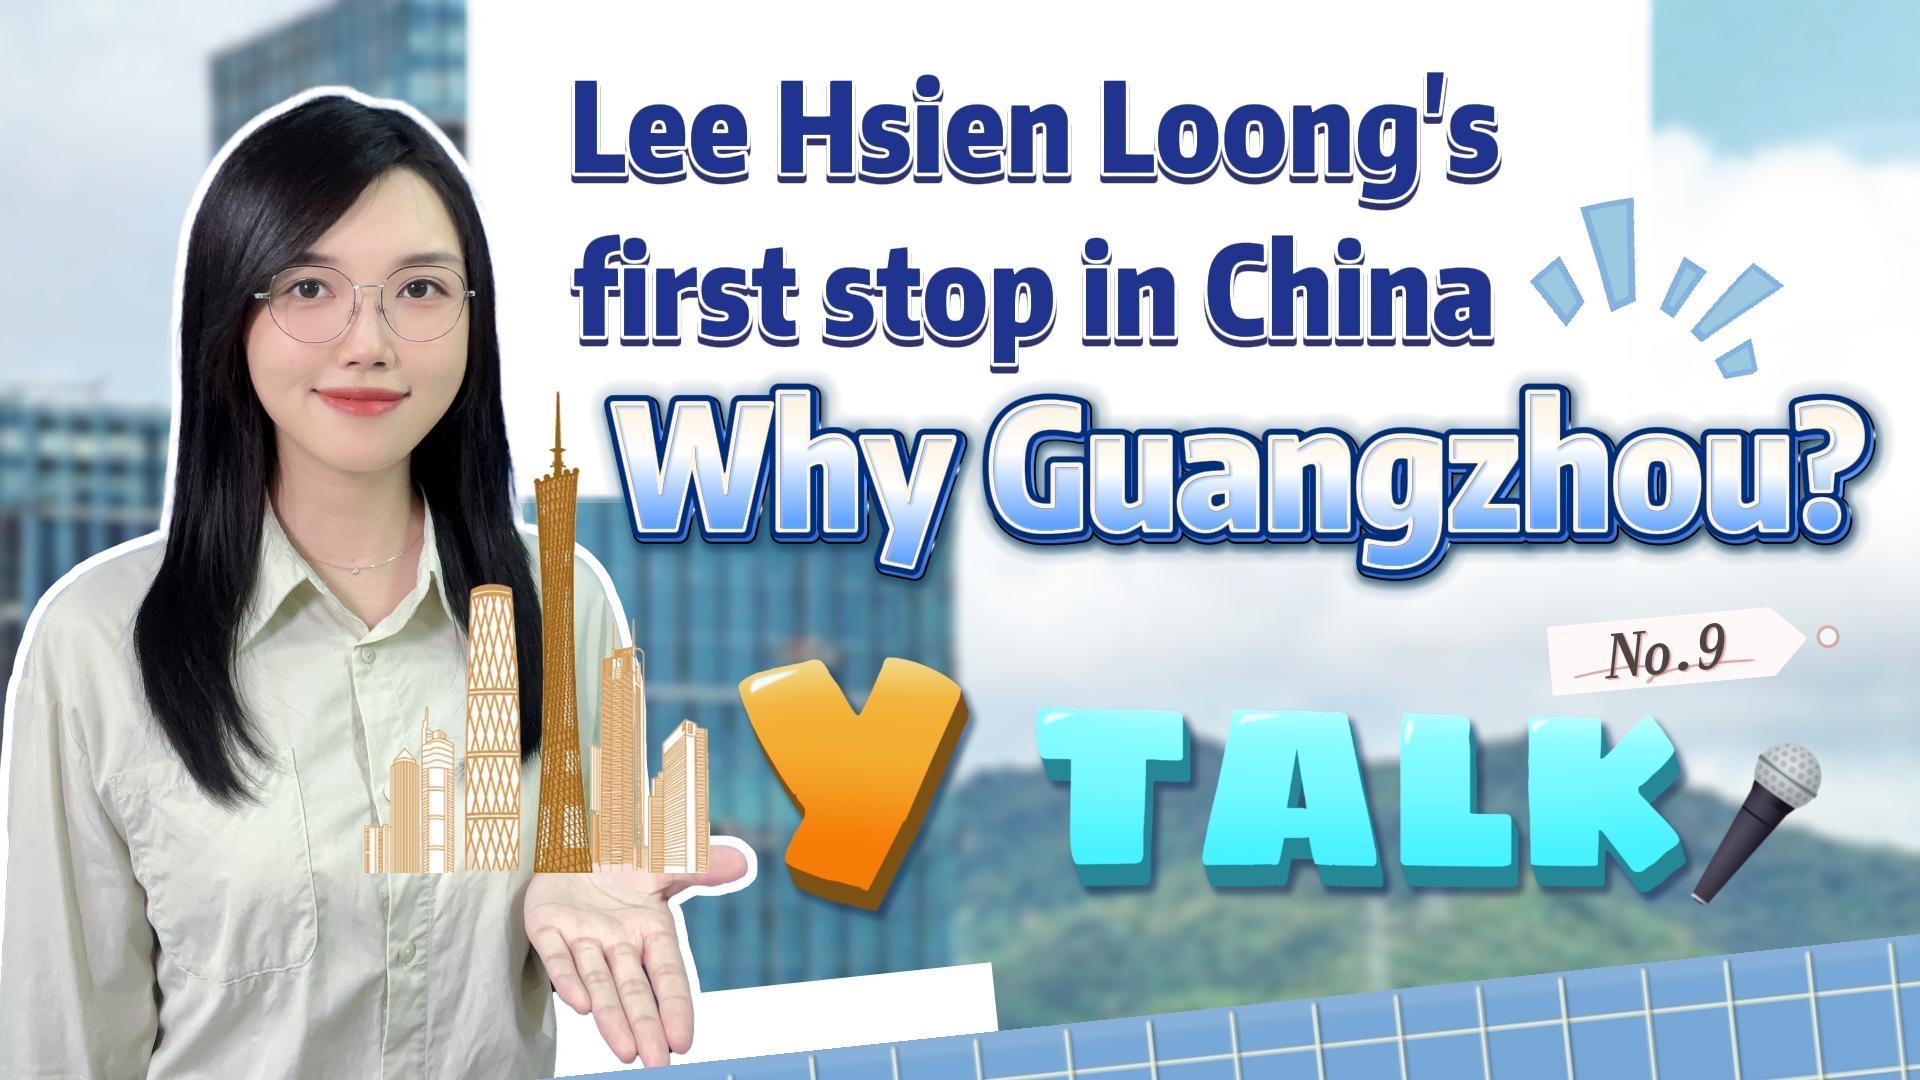 Y Talk⑨ | Lee Hsien Loong’s first stop in China, why Guangzhou? 李显龙访华第一站选在广州，为什么？